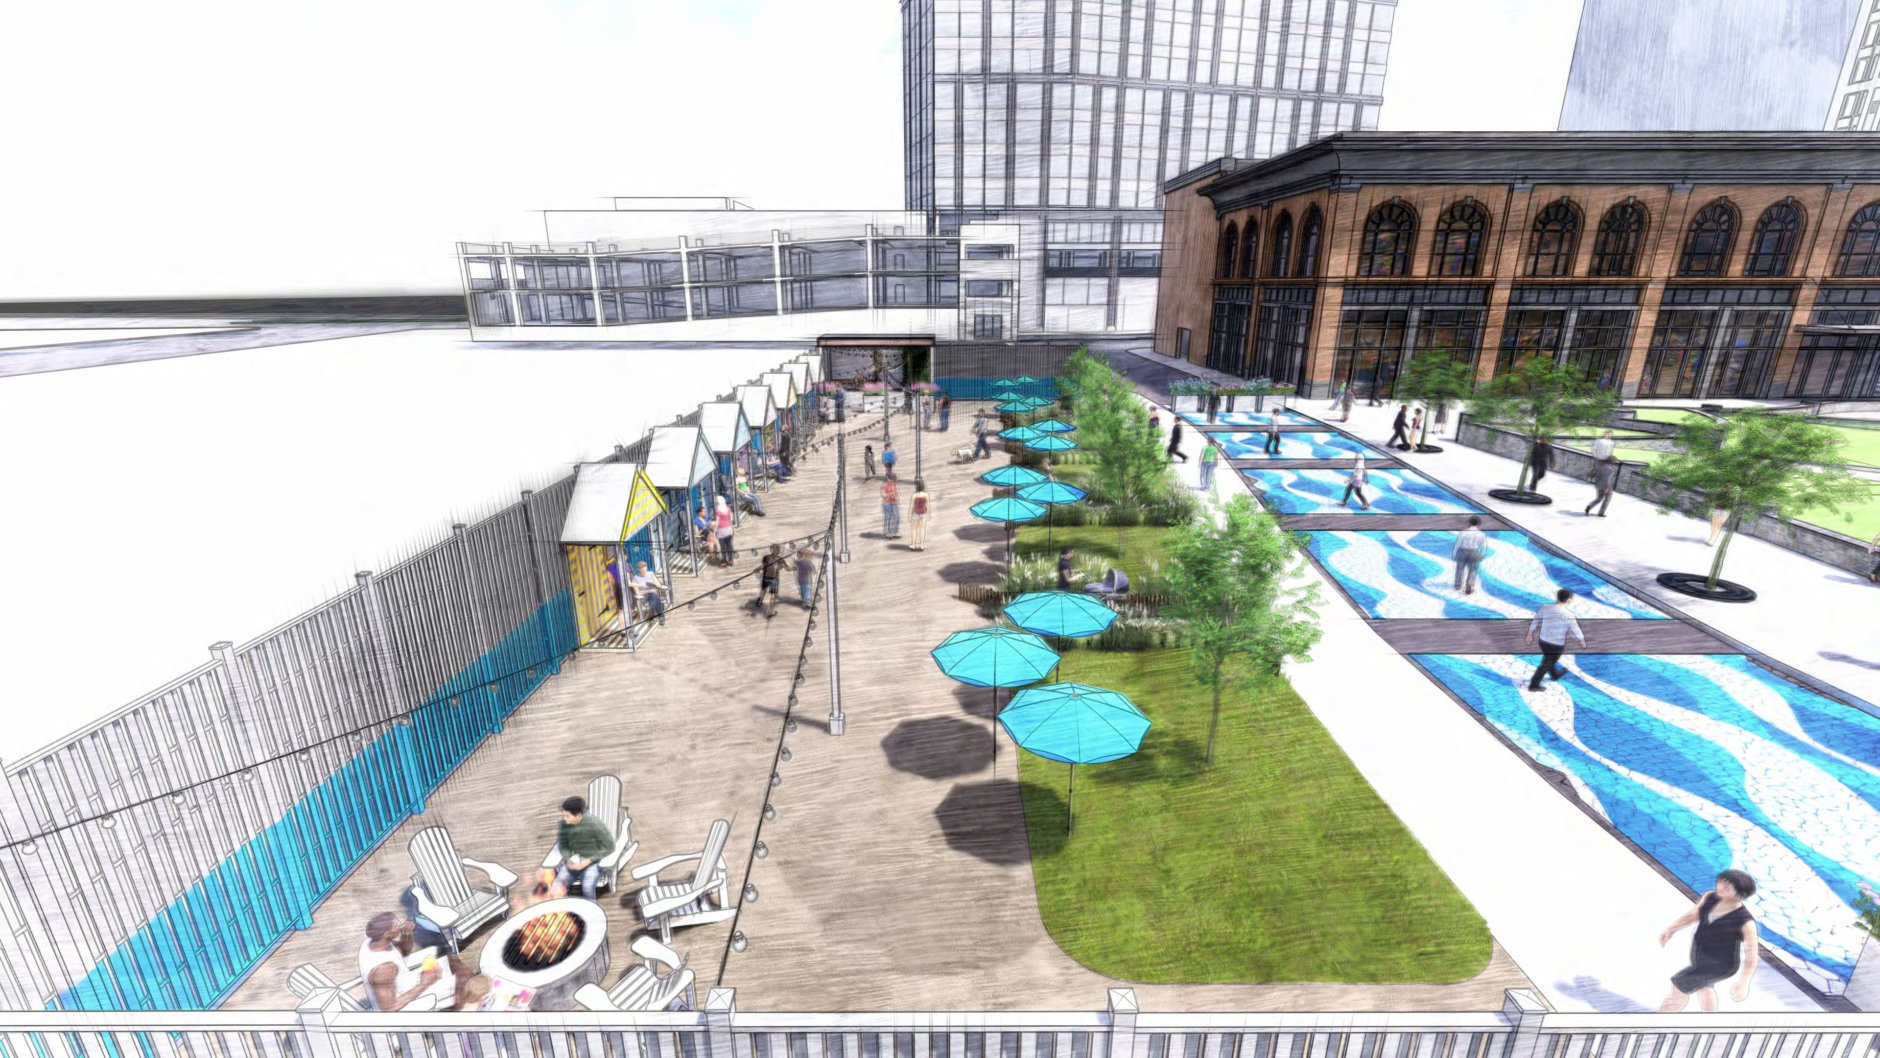 The Beach, designed for people to dine and relax, is coming to North Bethesda. (Courtesy Pike & Rose)